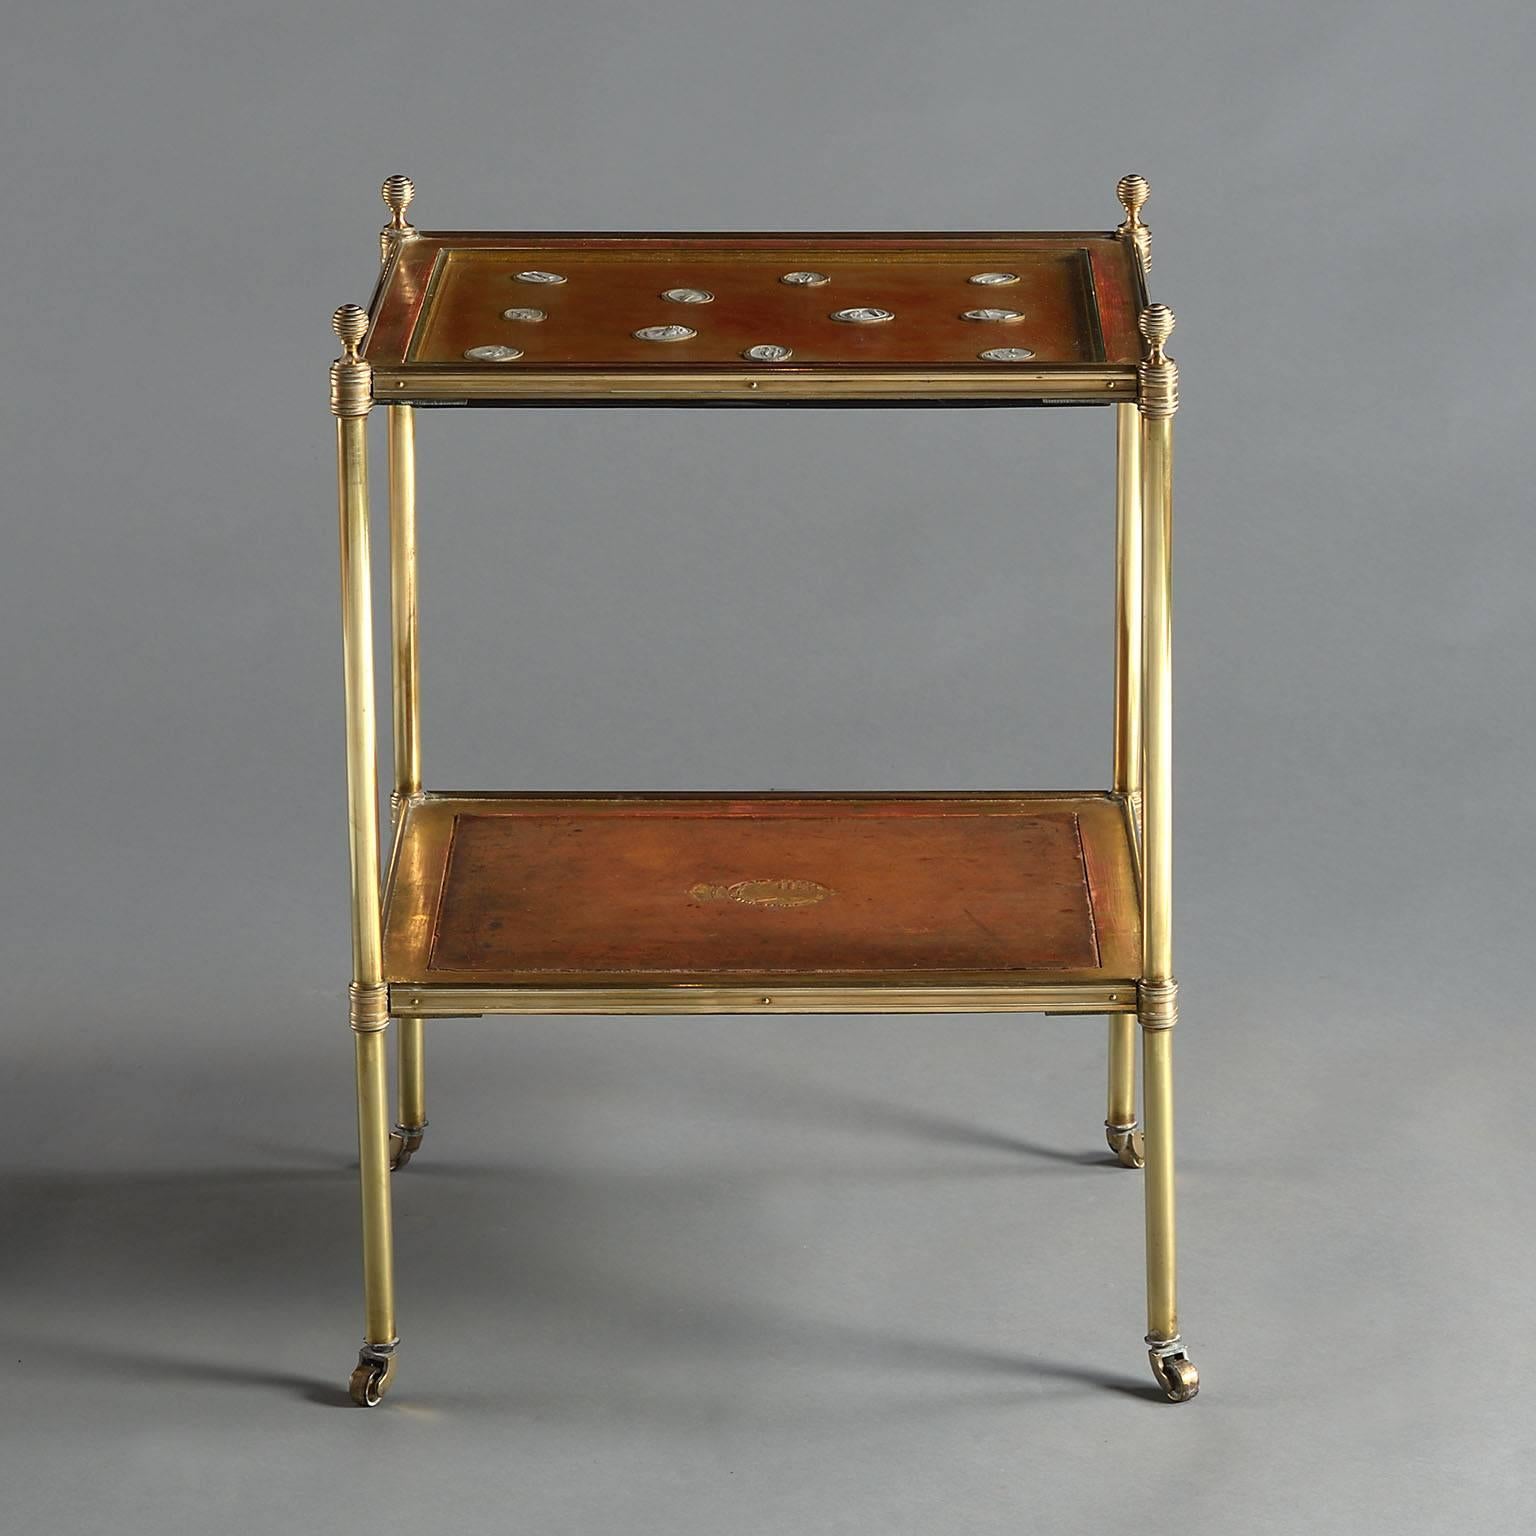 English Fine Pair of Two-Tier Etageres by Mallett